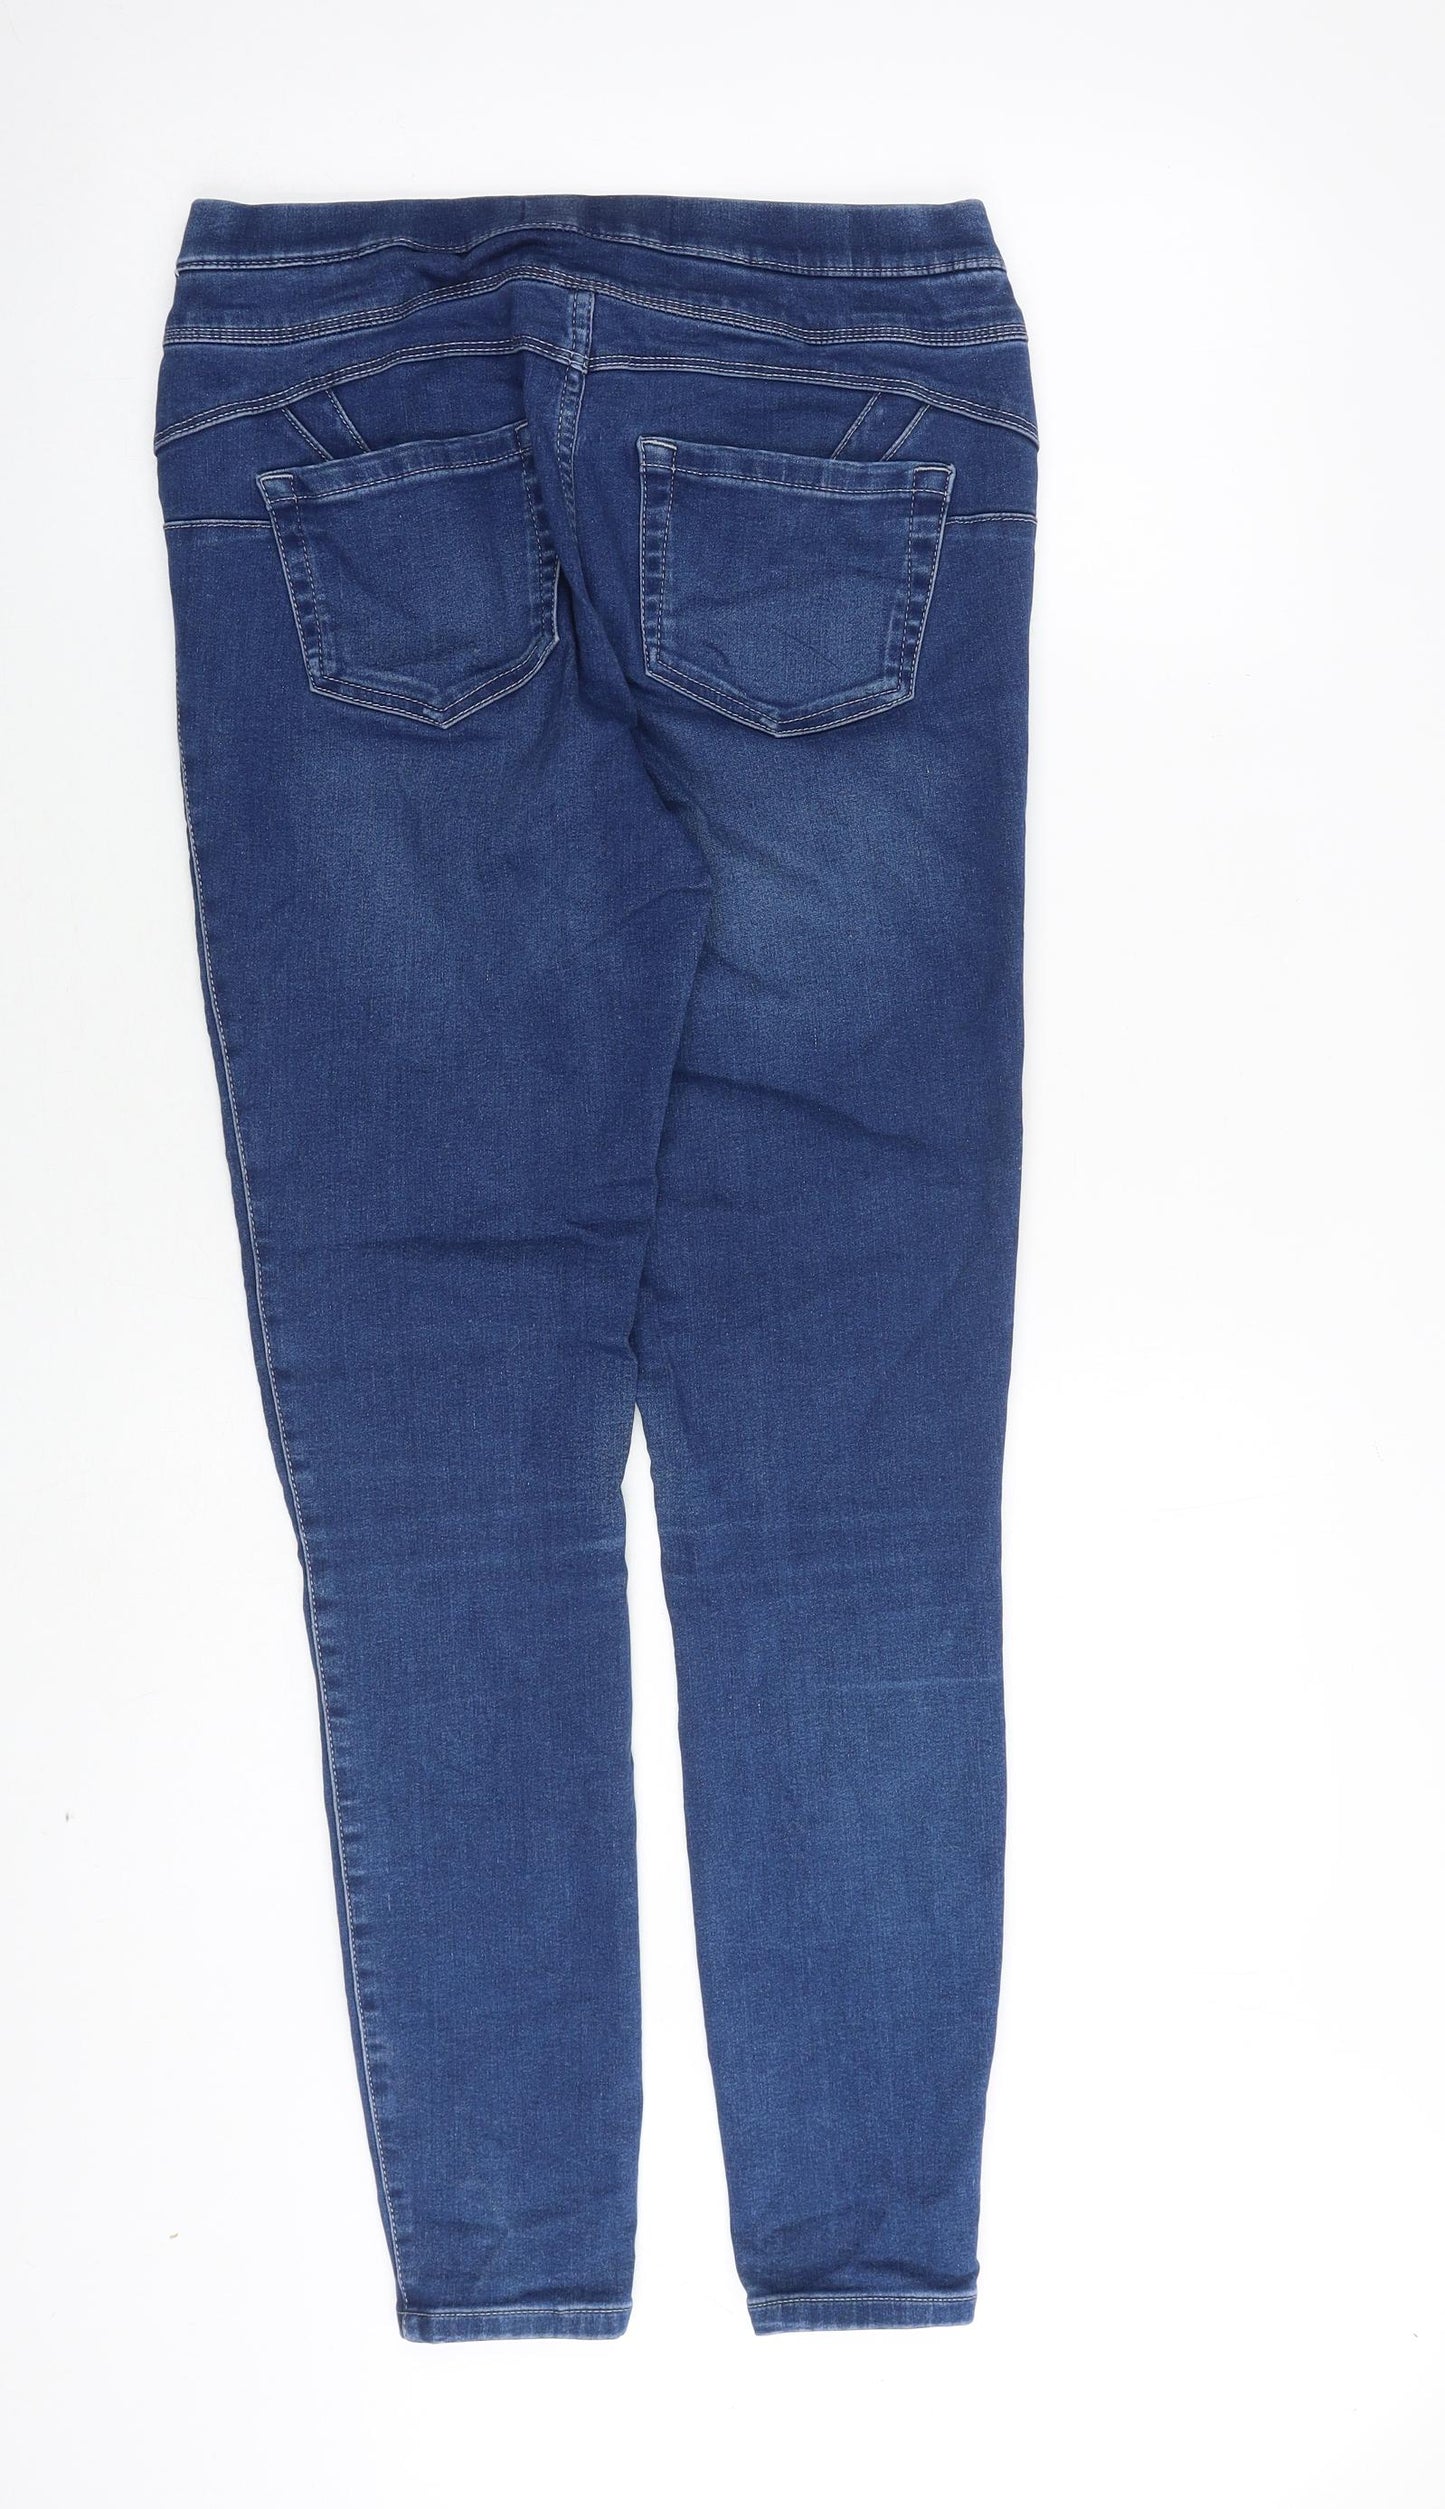 NEXT Womens Blue Cotton Jegging Jeans Size 12 L31 in Regular